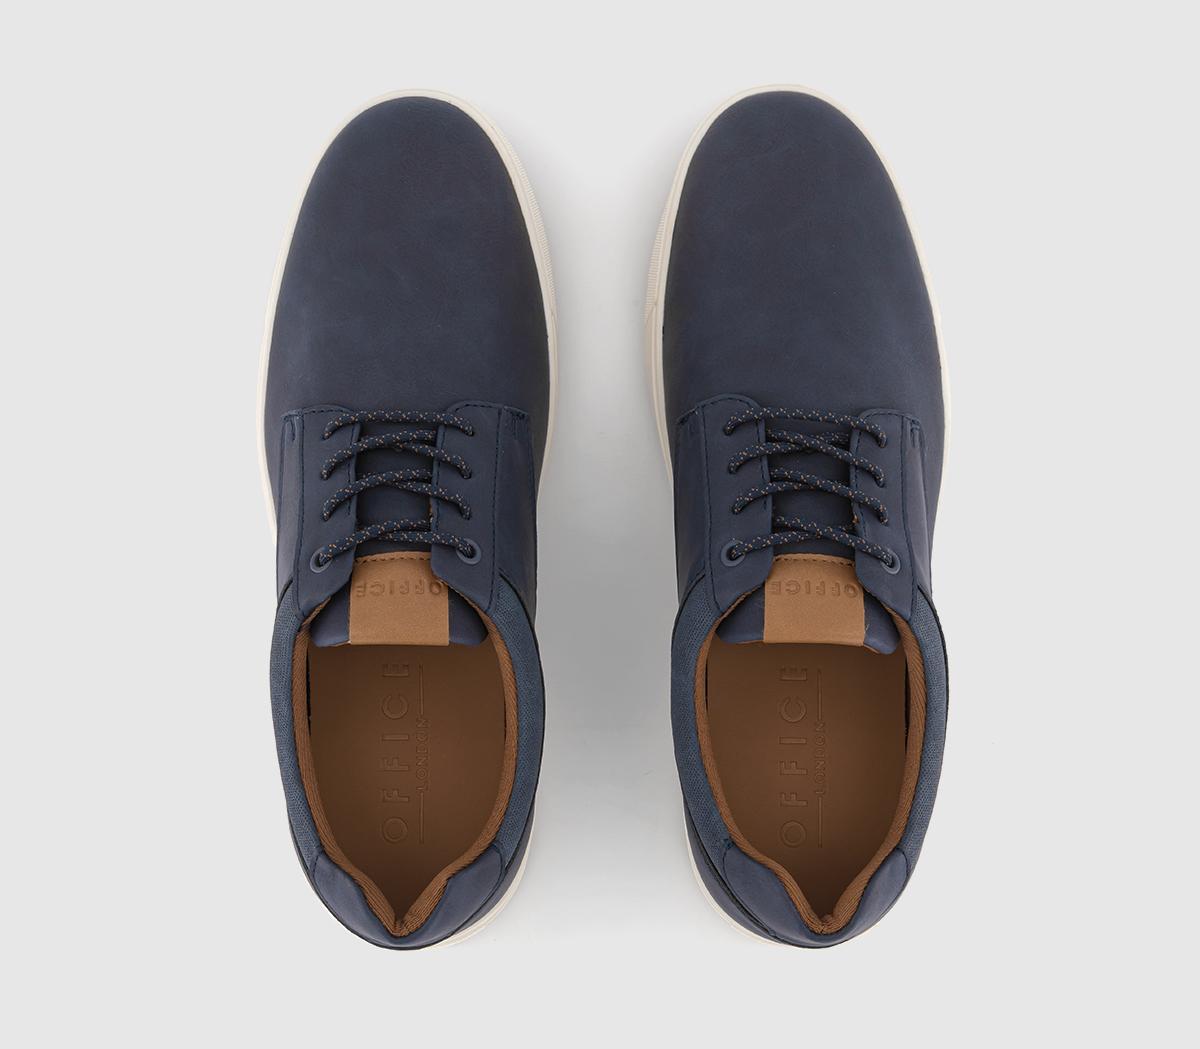 OFFICE Cannock Lace Up Shoes Navy - Men's Casual Shoes